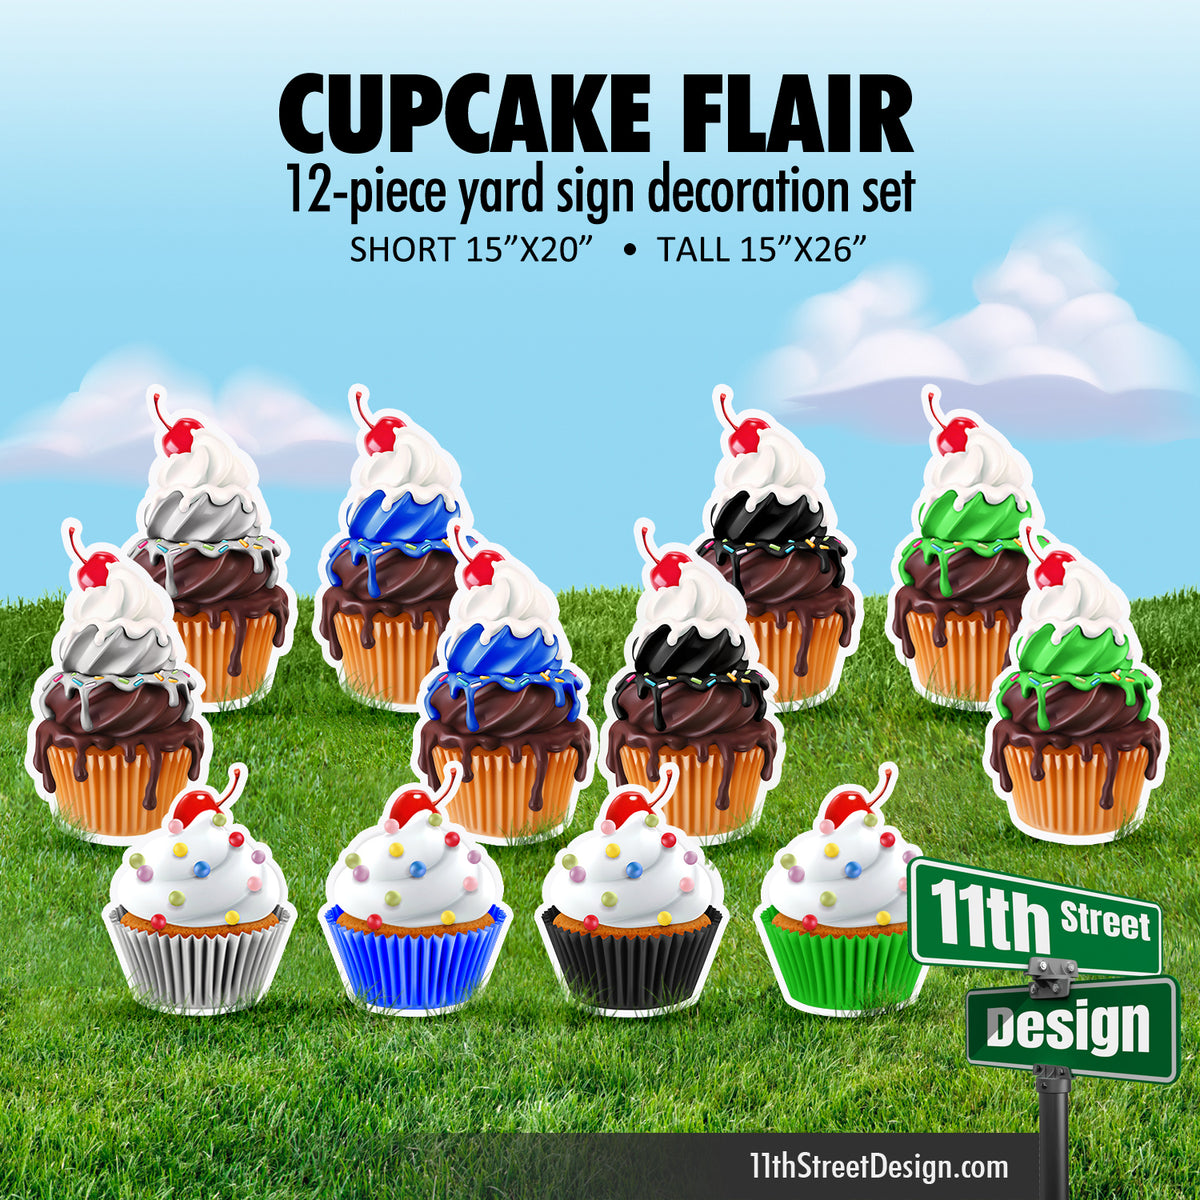 12-piece Cupcake Flair - Black, Green, Gray and Blue